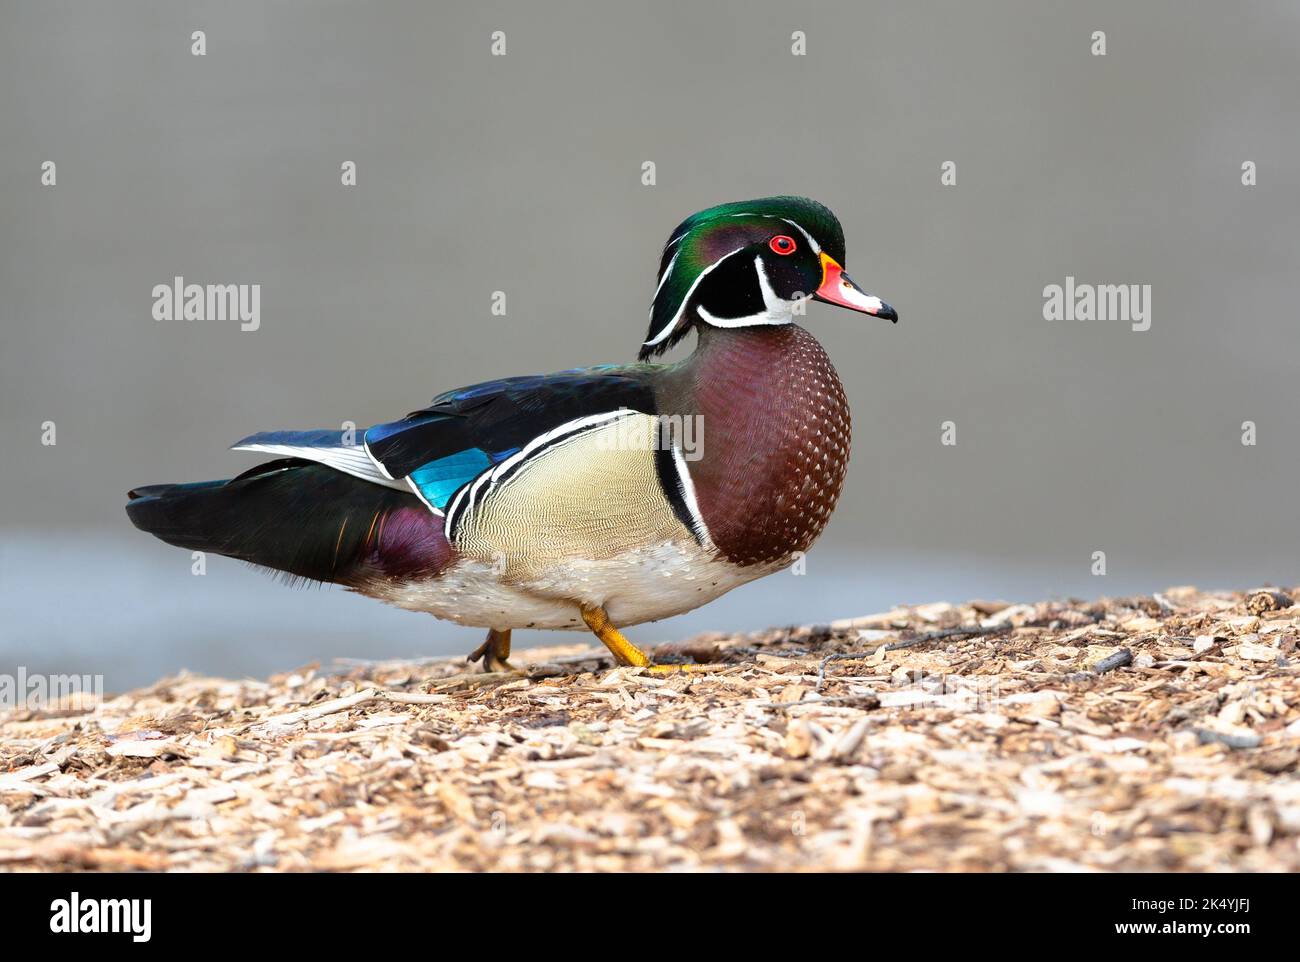 A Wood Duck walking up a hillside full of wood chips at a park with a neutral colored lake in the background. Stock Photo